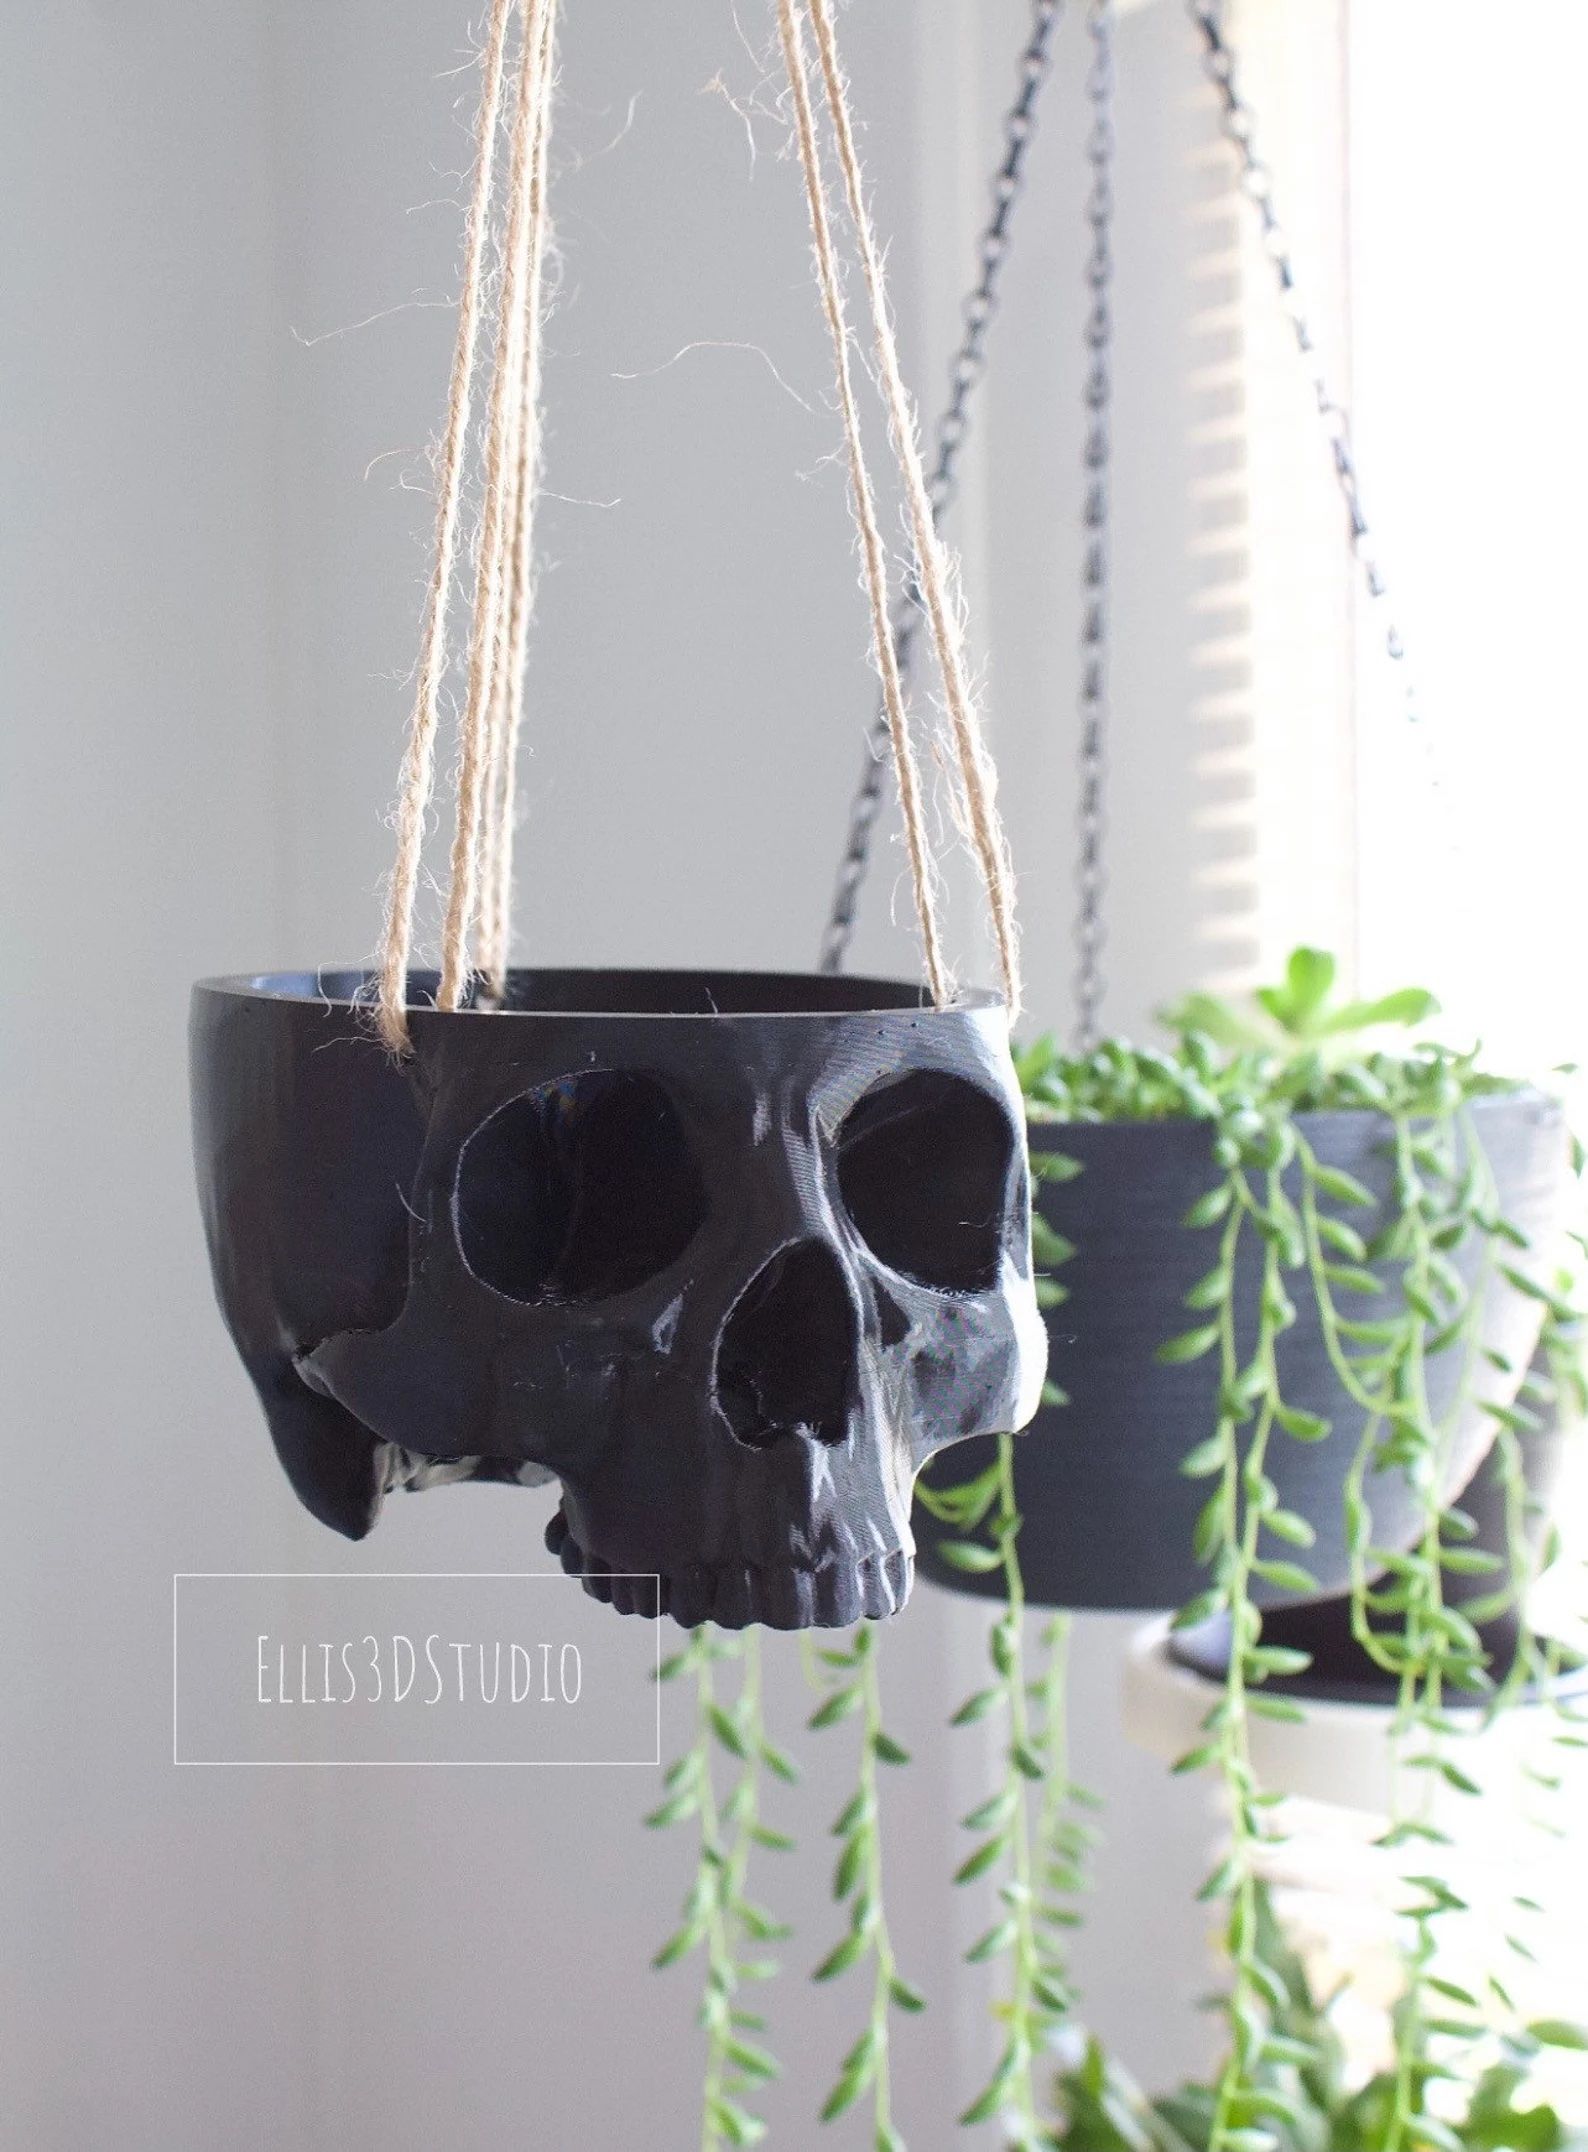 3d printed skull made into a hanging planter